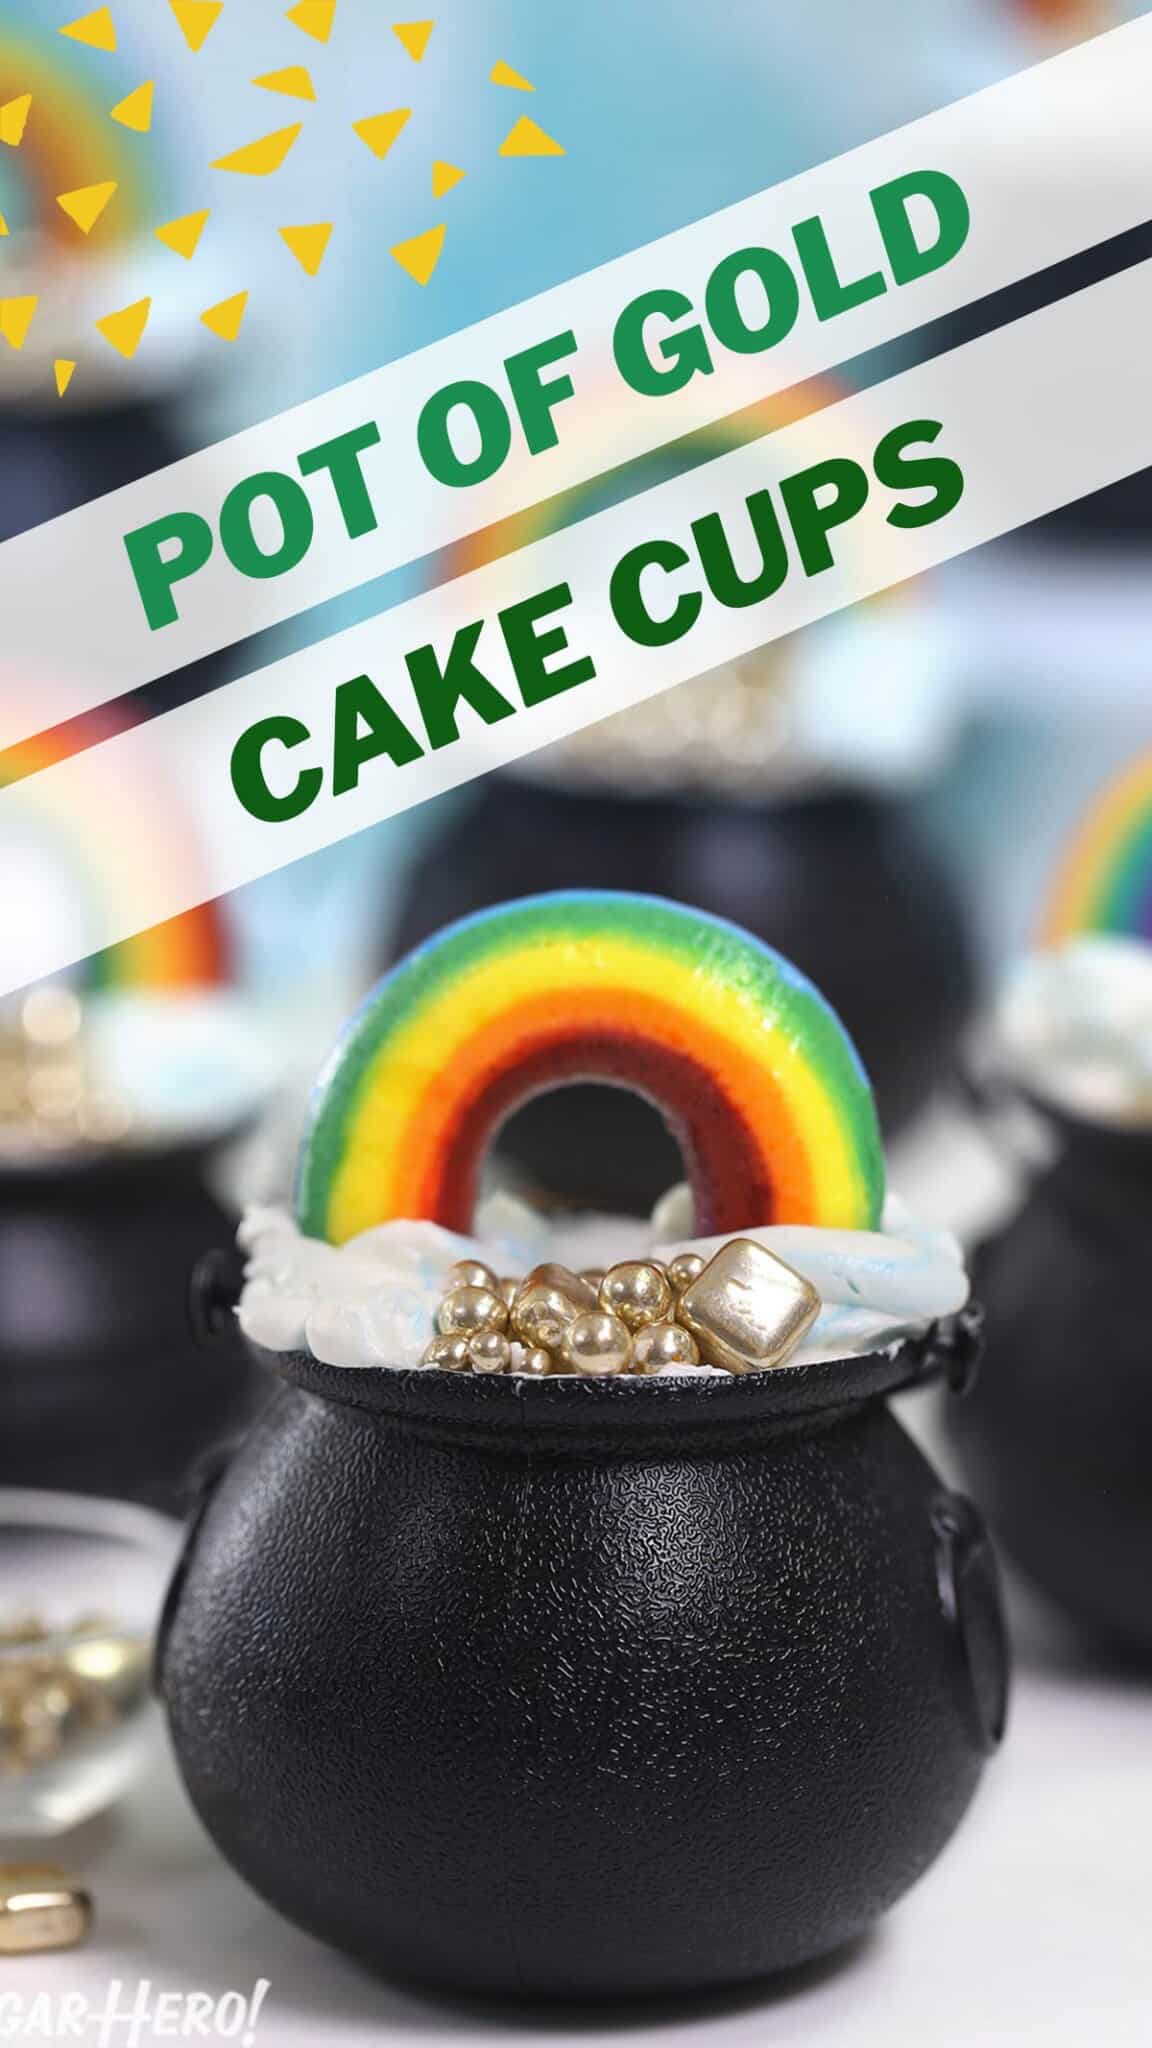 Photo of Pot of Gold Cake Cups with text overlay for Pinterest.